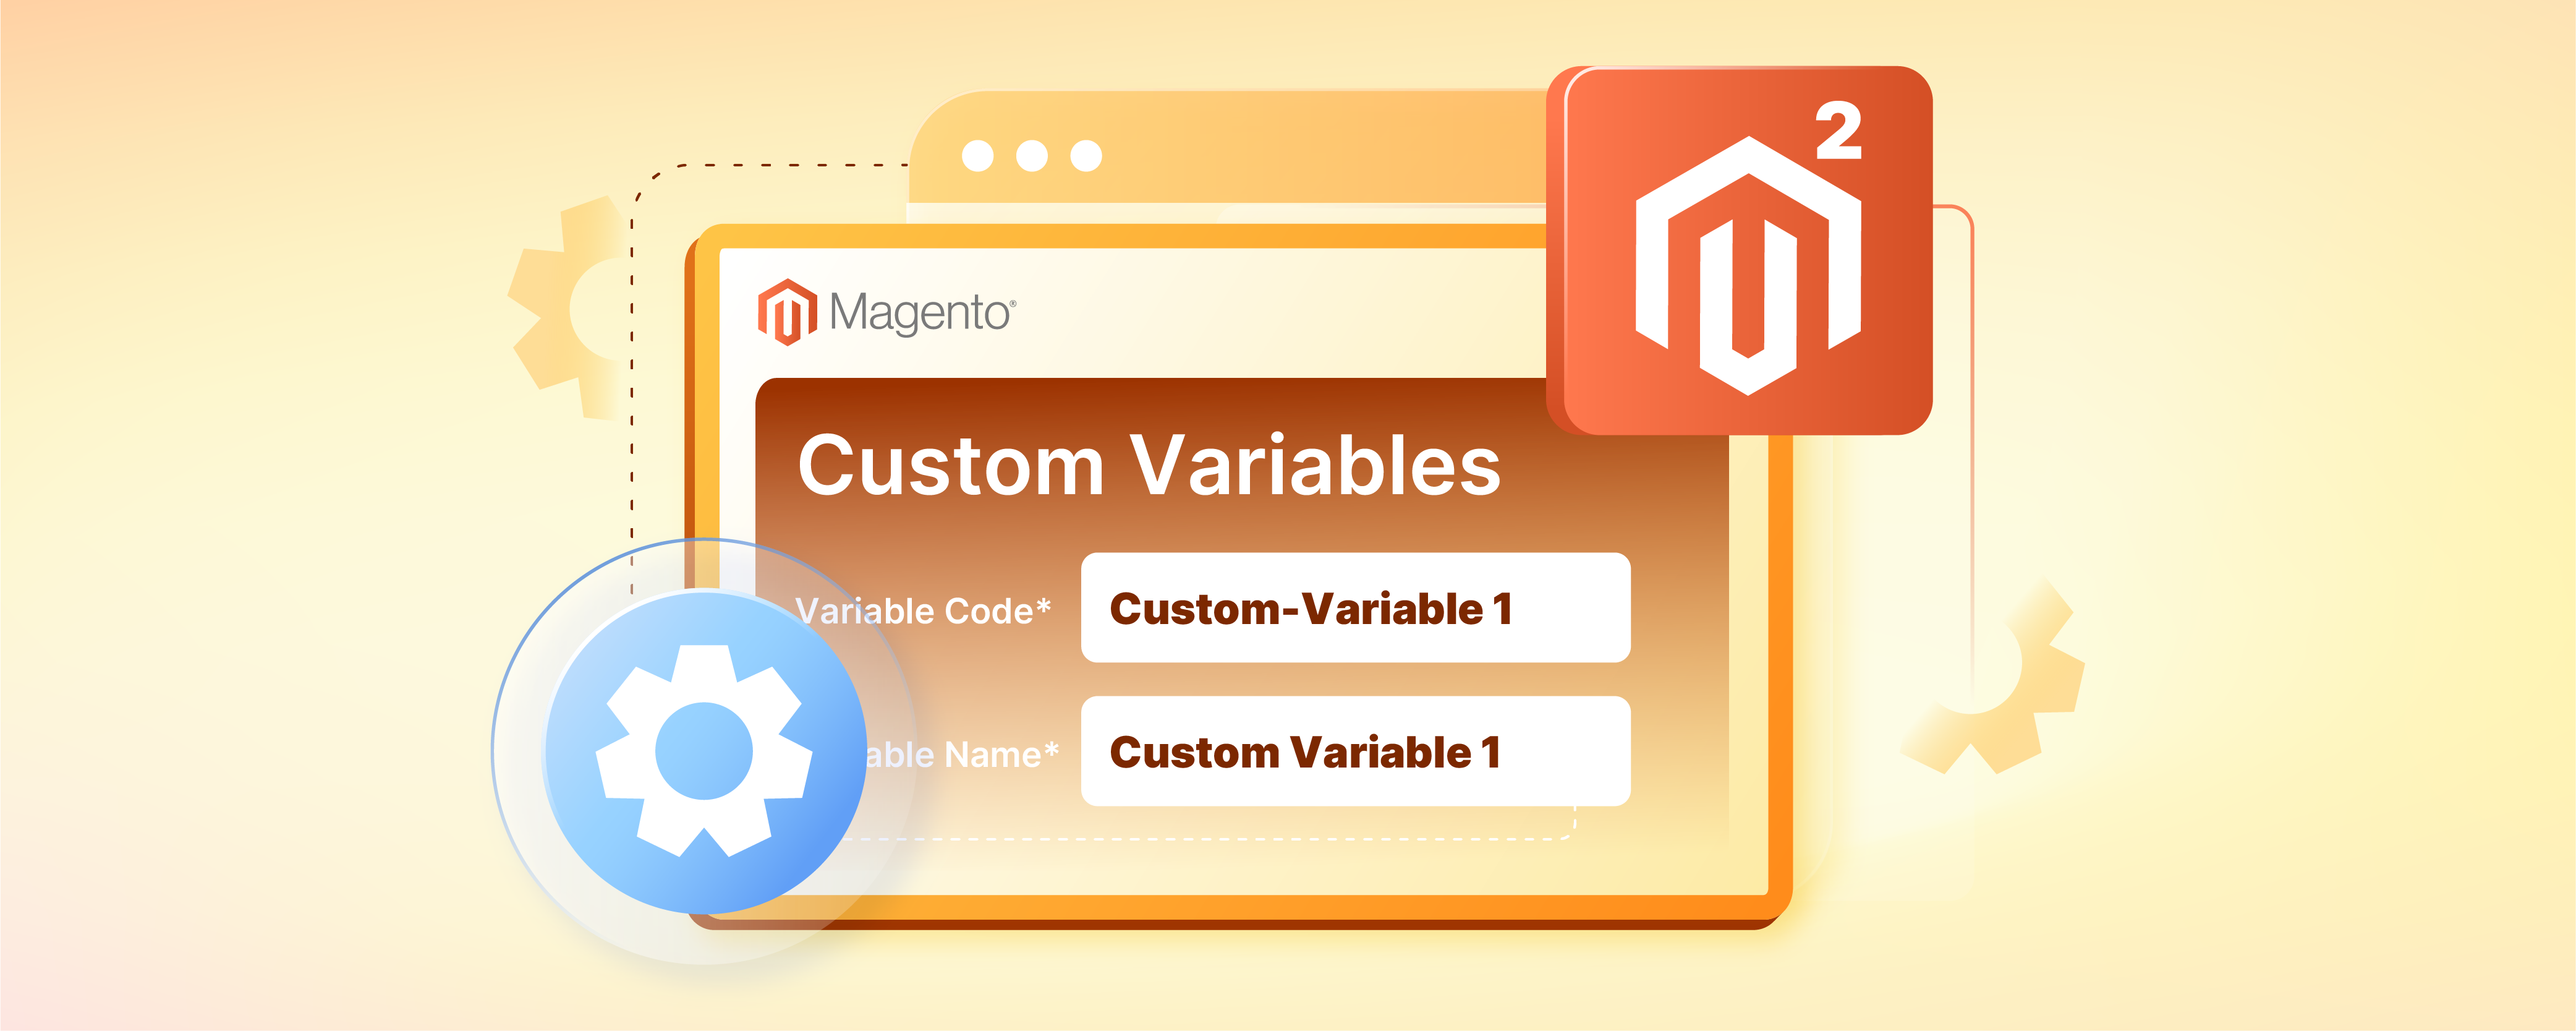 How to Create And Add Custom Magento Variables in Magento 2